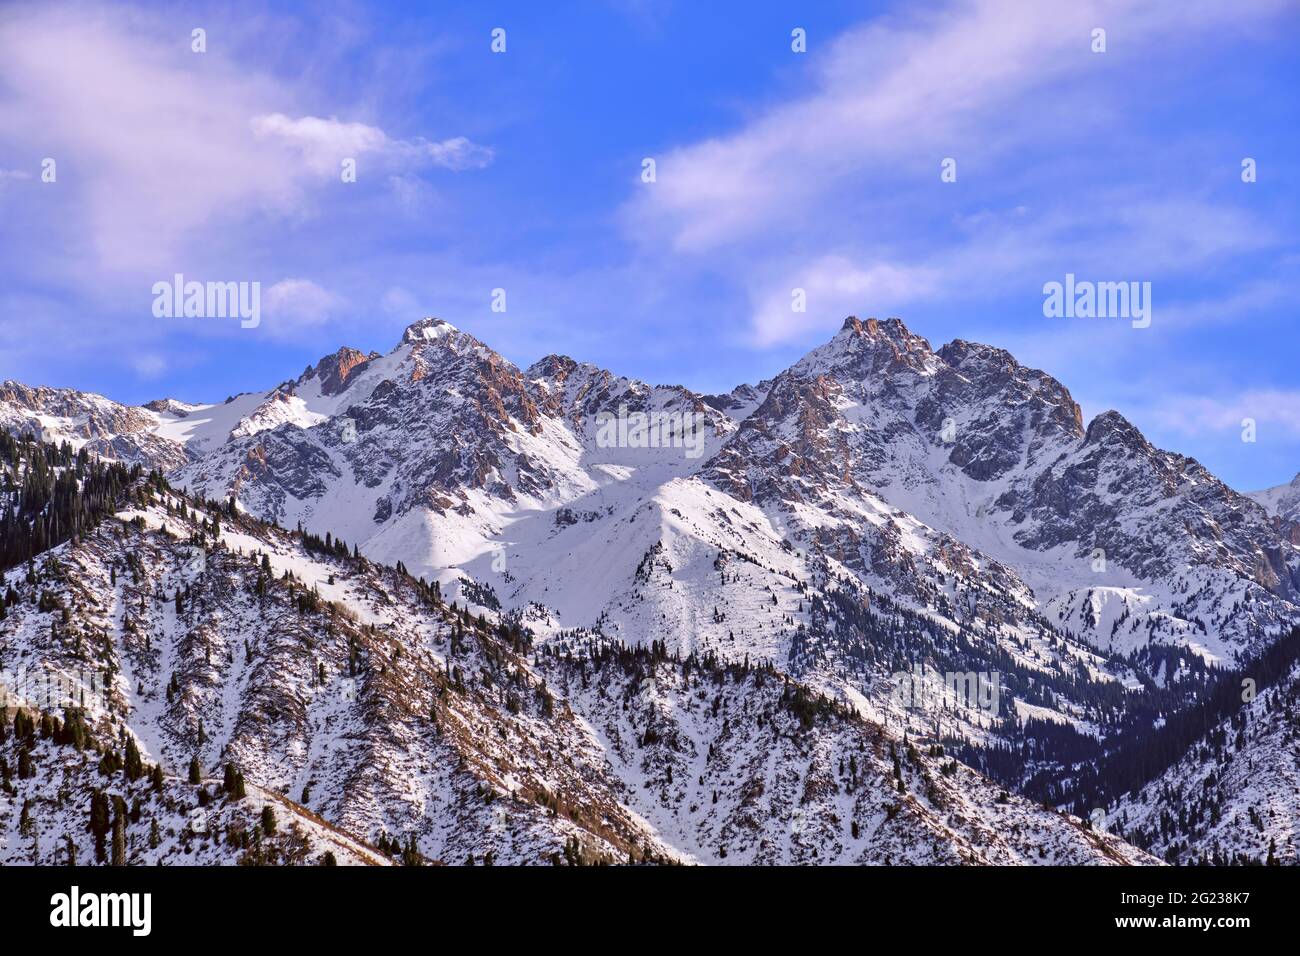 Majestic rocky peaks with fir forest on the background of  blue sky with clouds  in the winter season Stock Photo